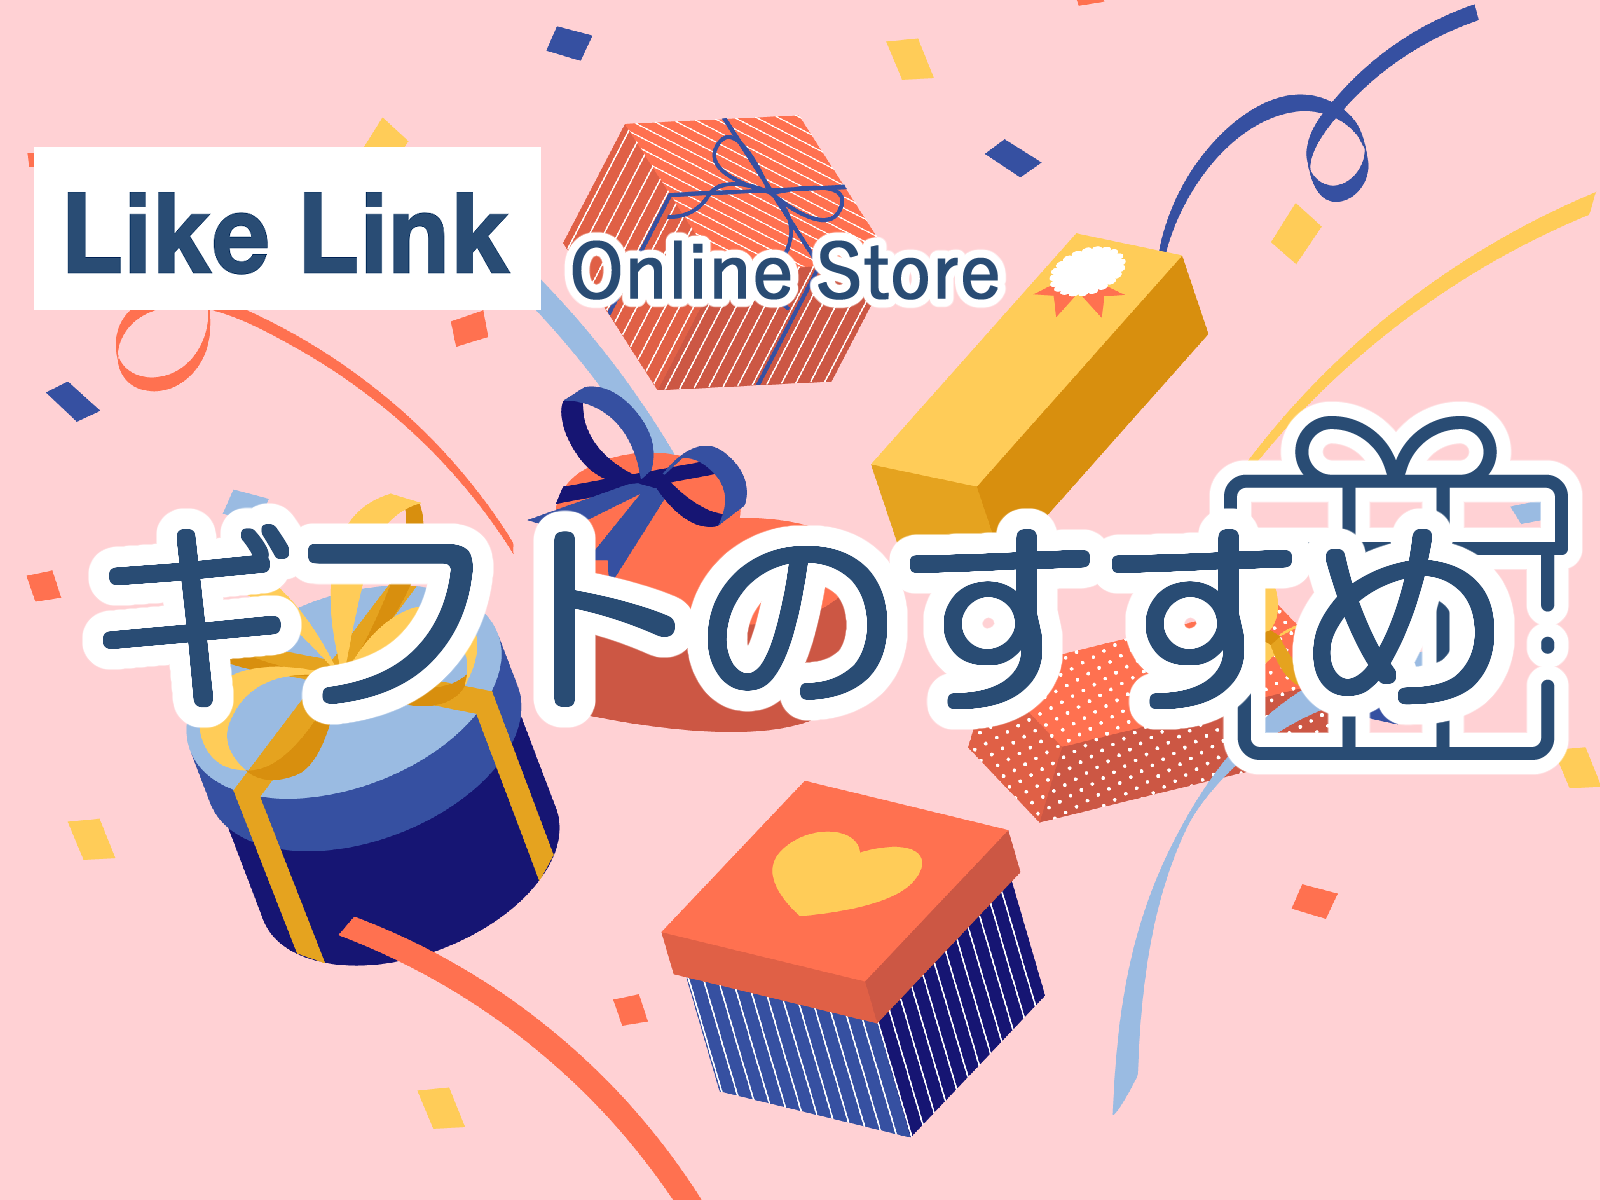 Online Store ～ギフト～